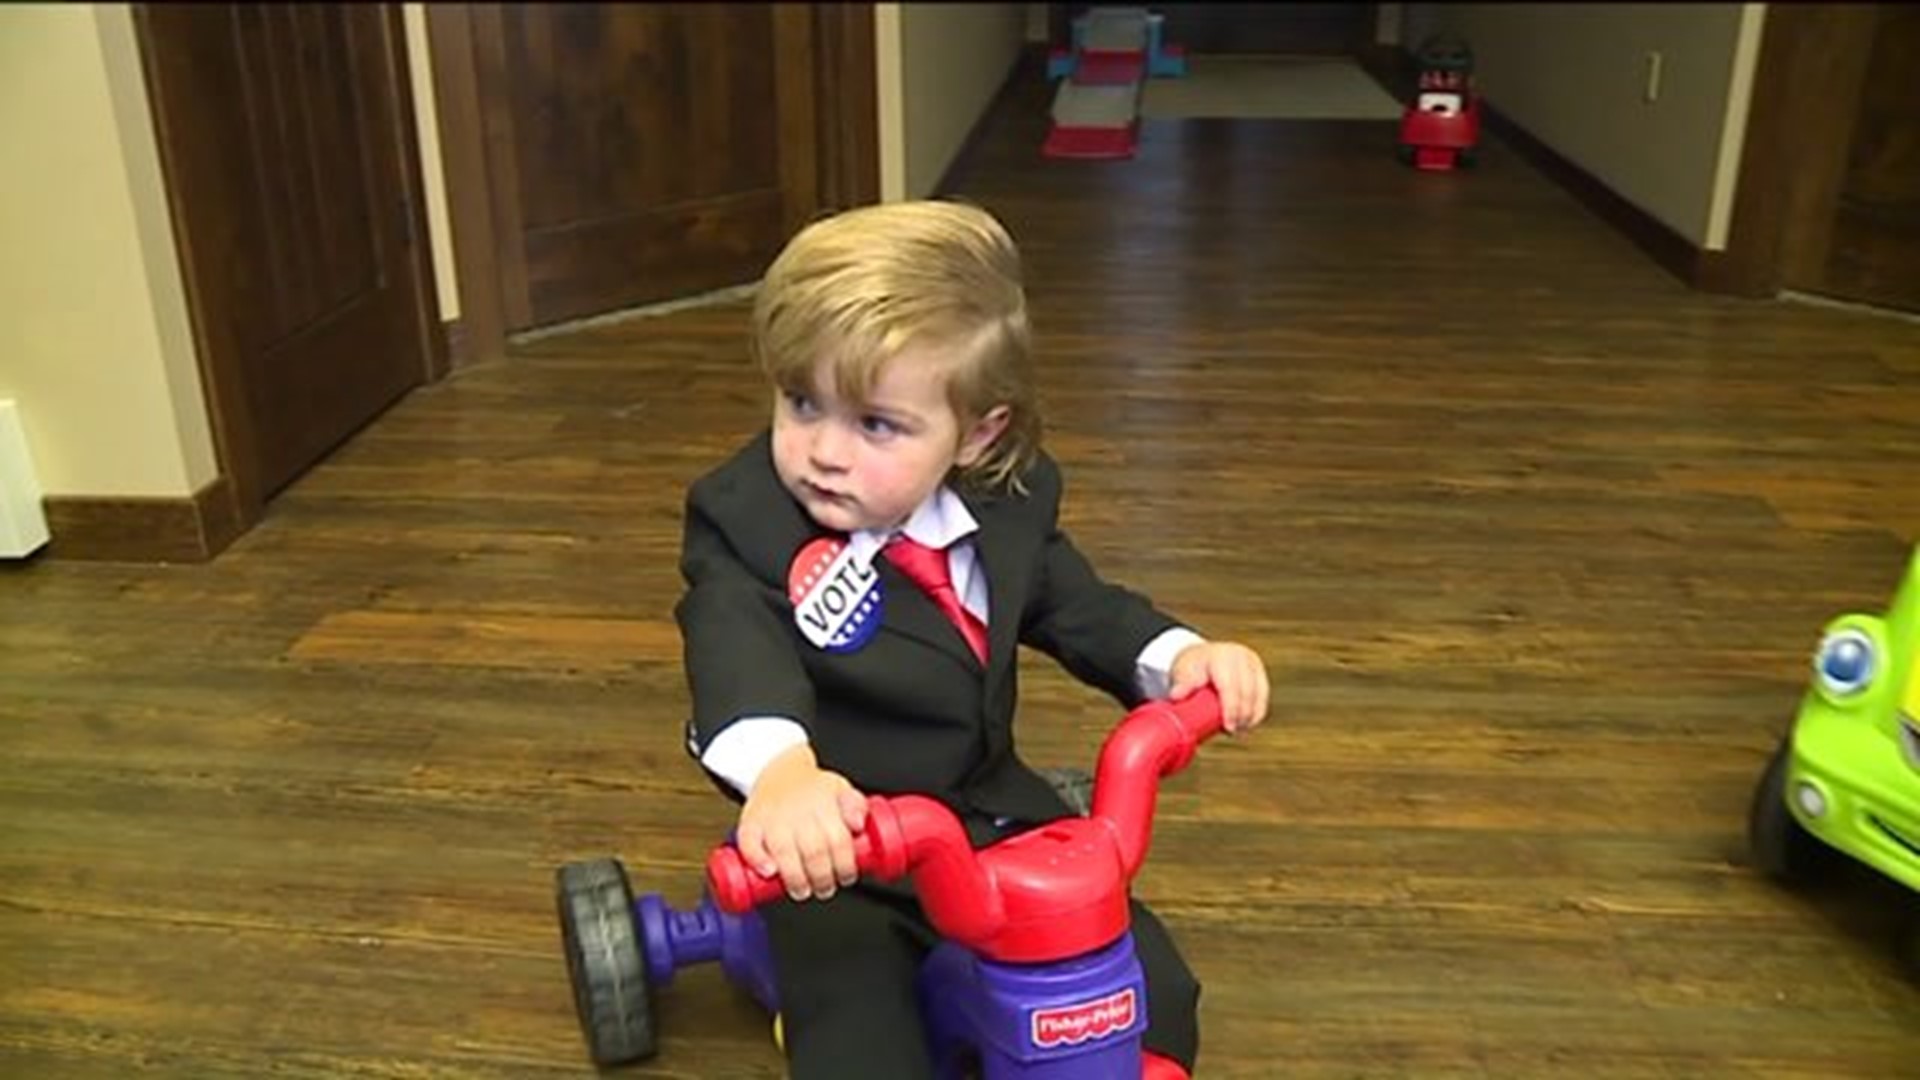 Meet 'Baby Trump,' The Tot Who Stole the Show at Trump Rally